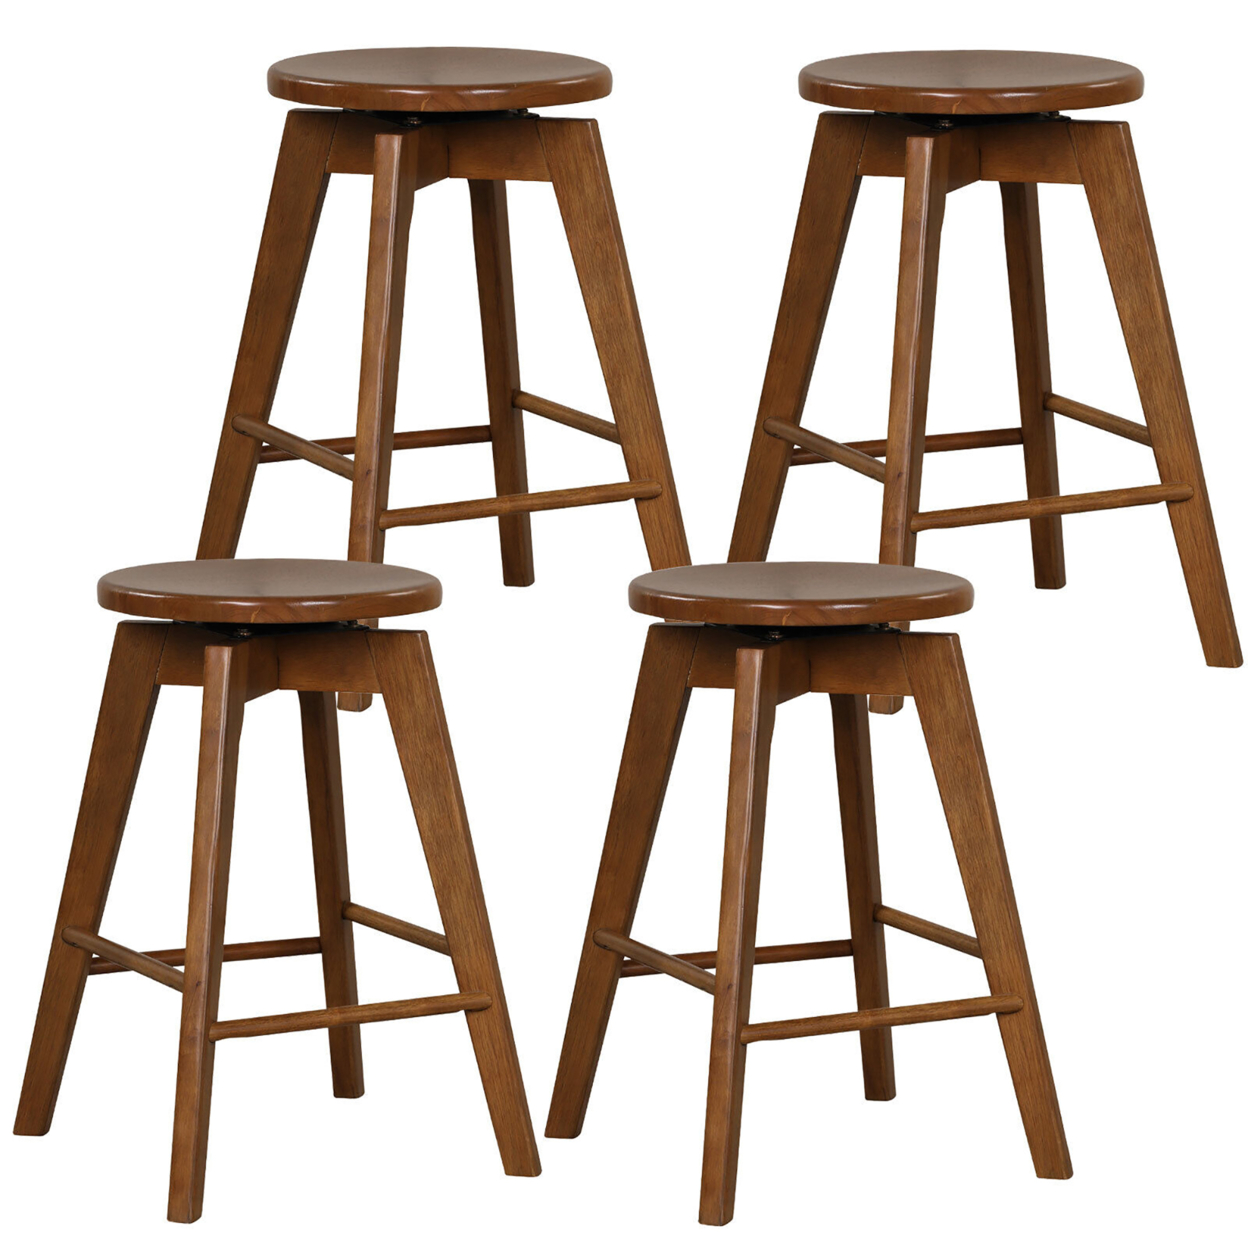 Set Of 4 Swivel Round Bar Stools Counter Height Dining Chairs W/ Rubber Wood Legs